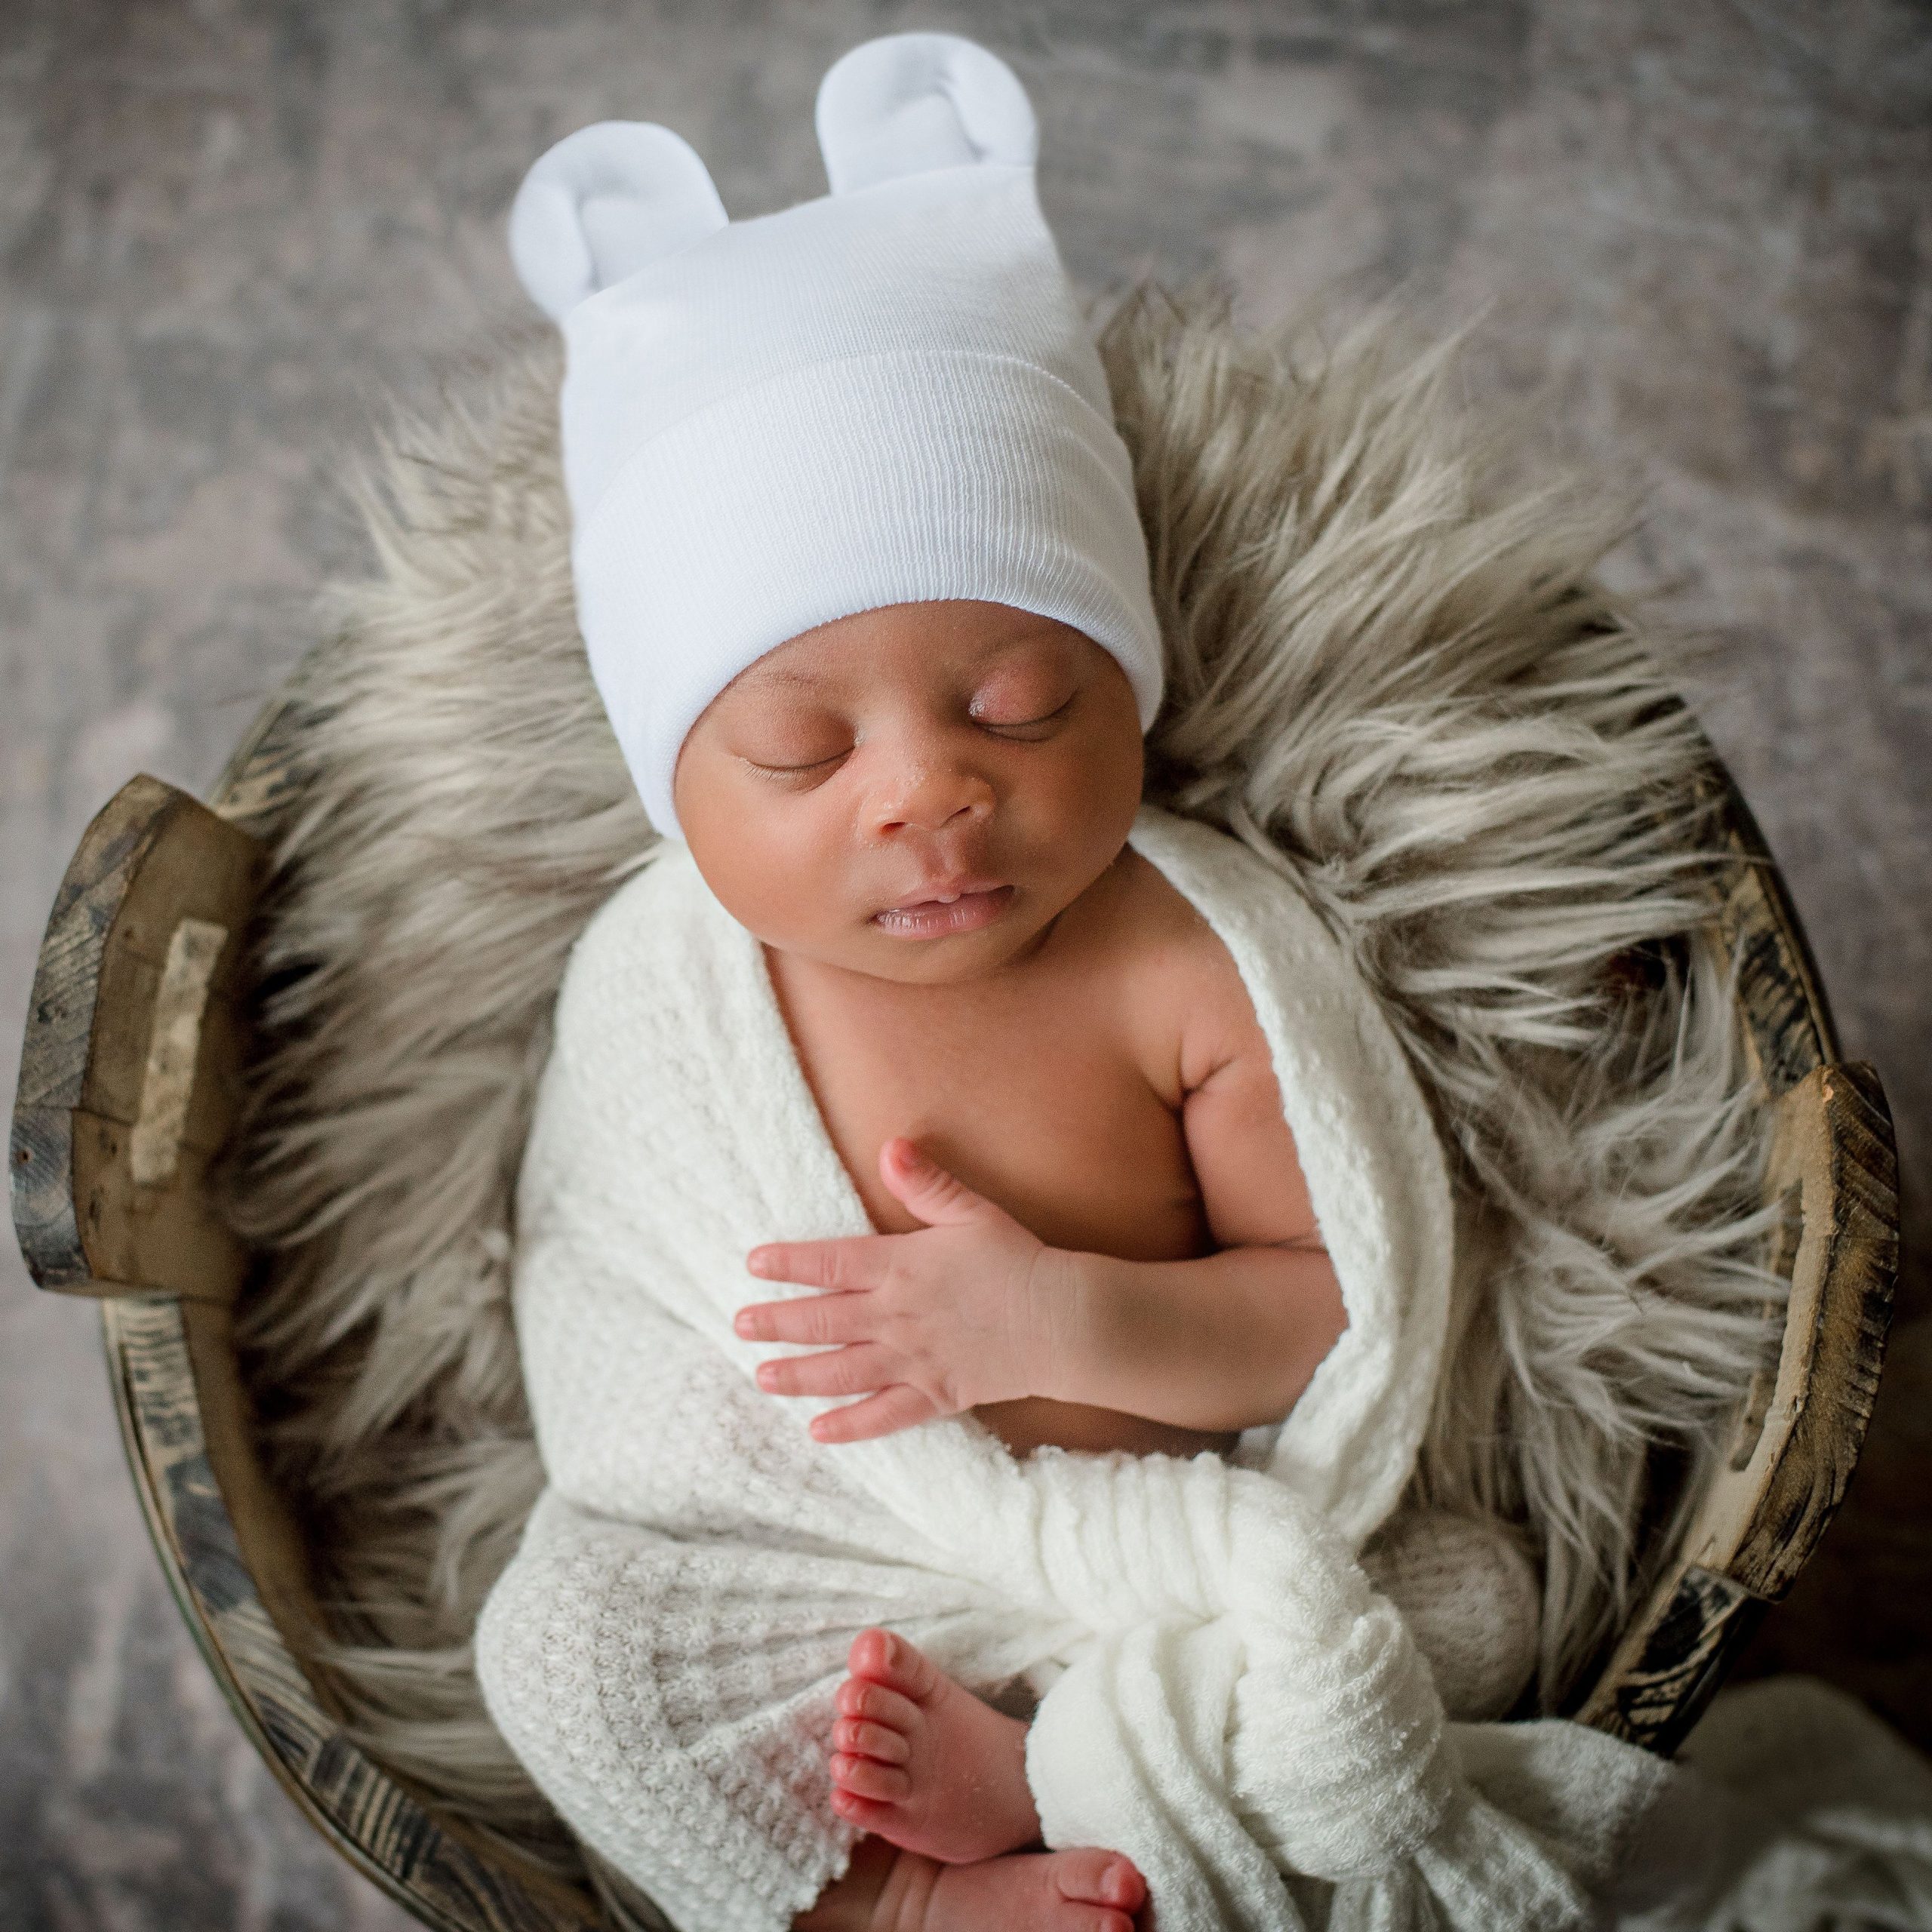 Newborn hats: Keeping Your Little One Stylish and Cozy缩略图